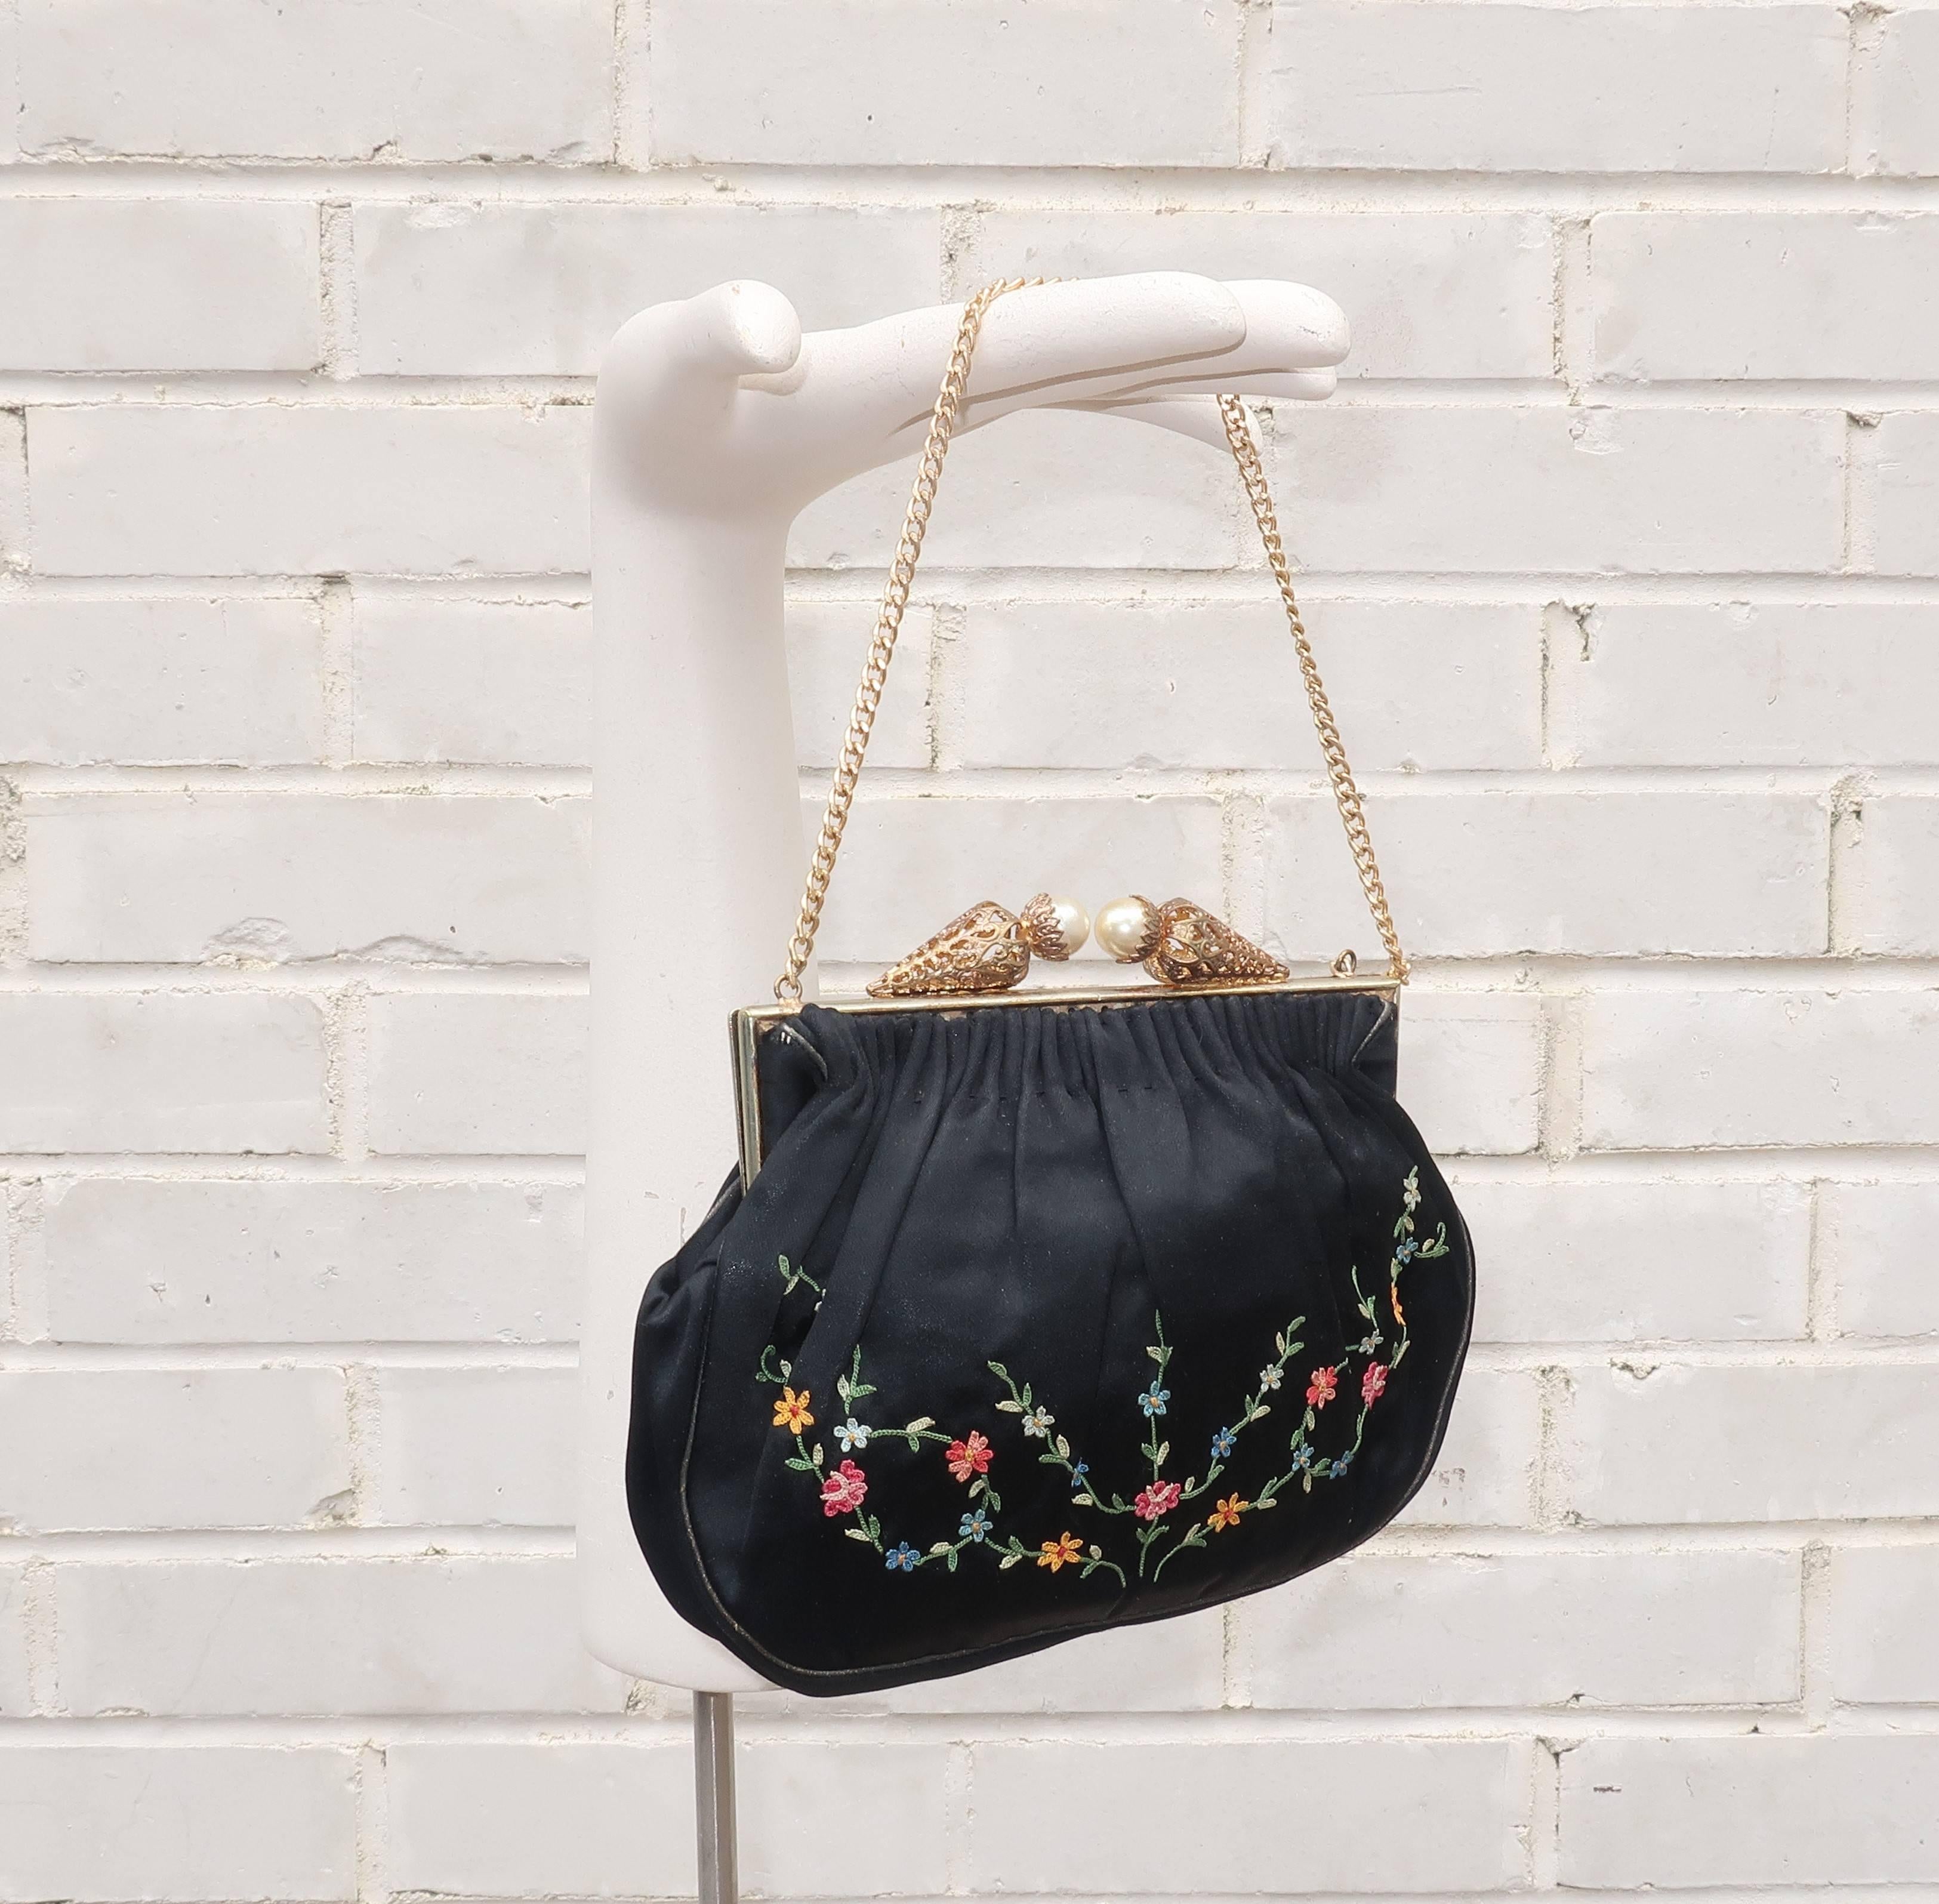 This delicate and ultra feminine 1950’s French black satin handbag features a bright floral chain stitch pattern in shades of pink, yellow, blue and green.  The gold tone frame is accented with filigreed cones topped by faux pearls which twist to